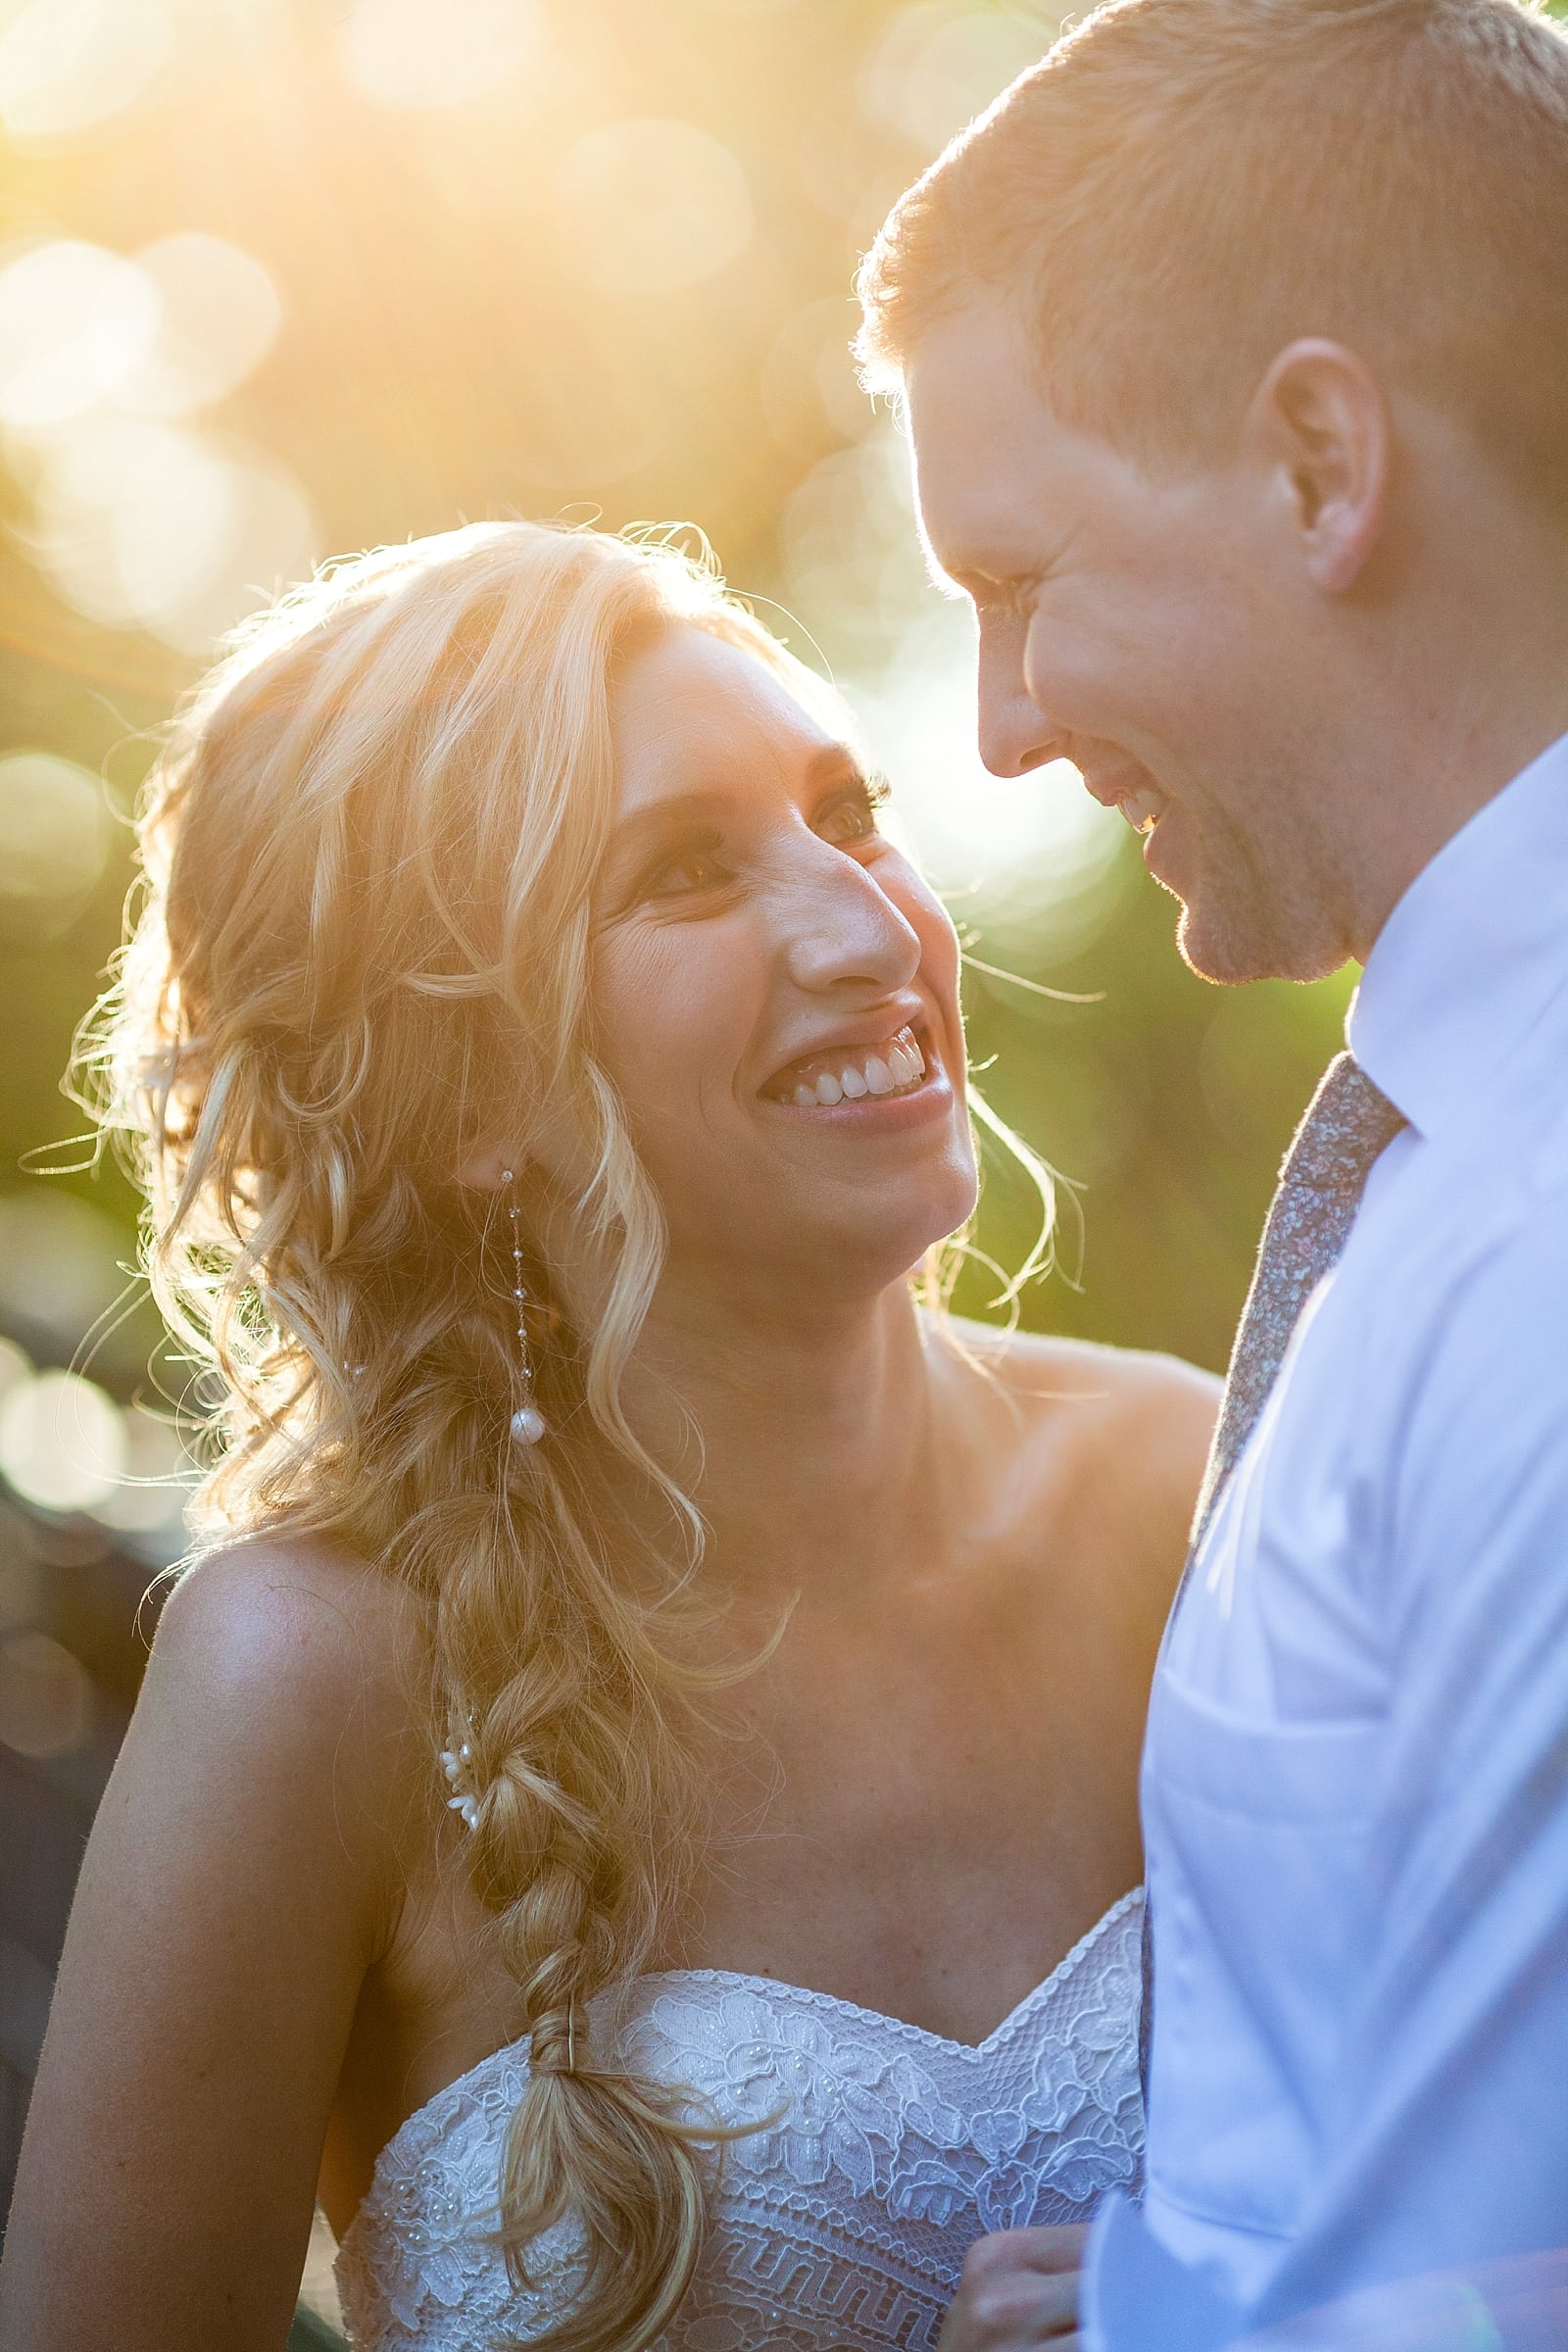 bride and groom, husband and wife, wedding portrait, sunlight portrait, sunset, sun flare, lens flare